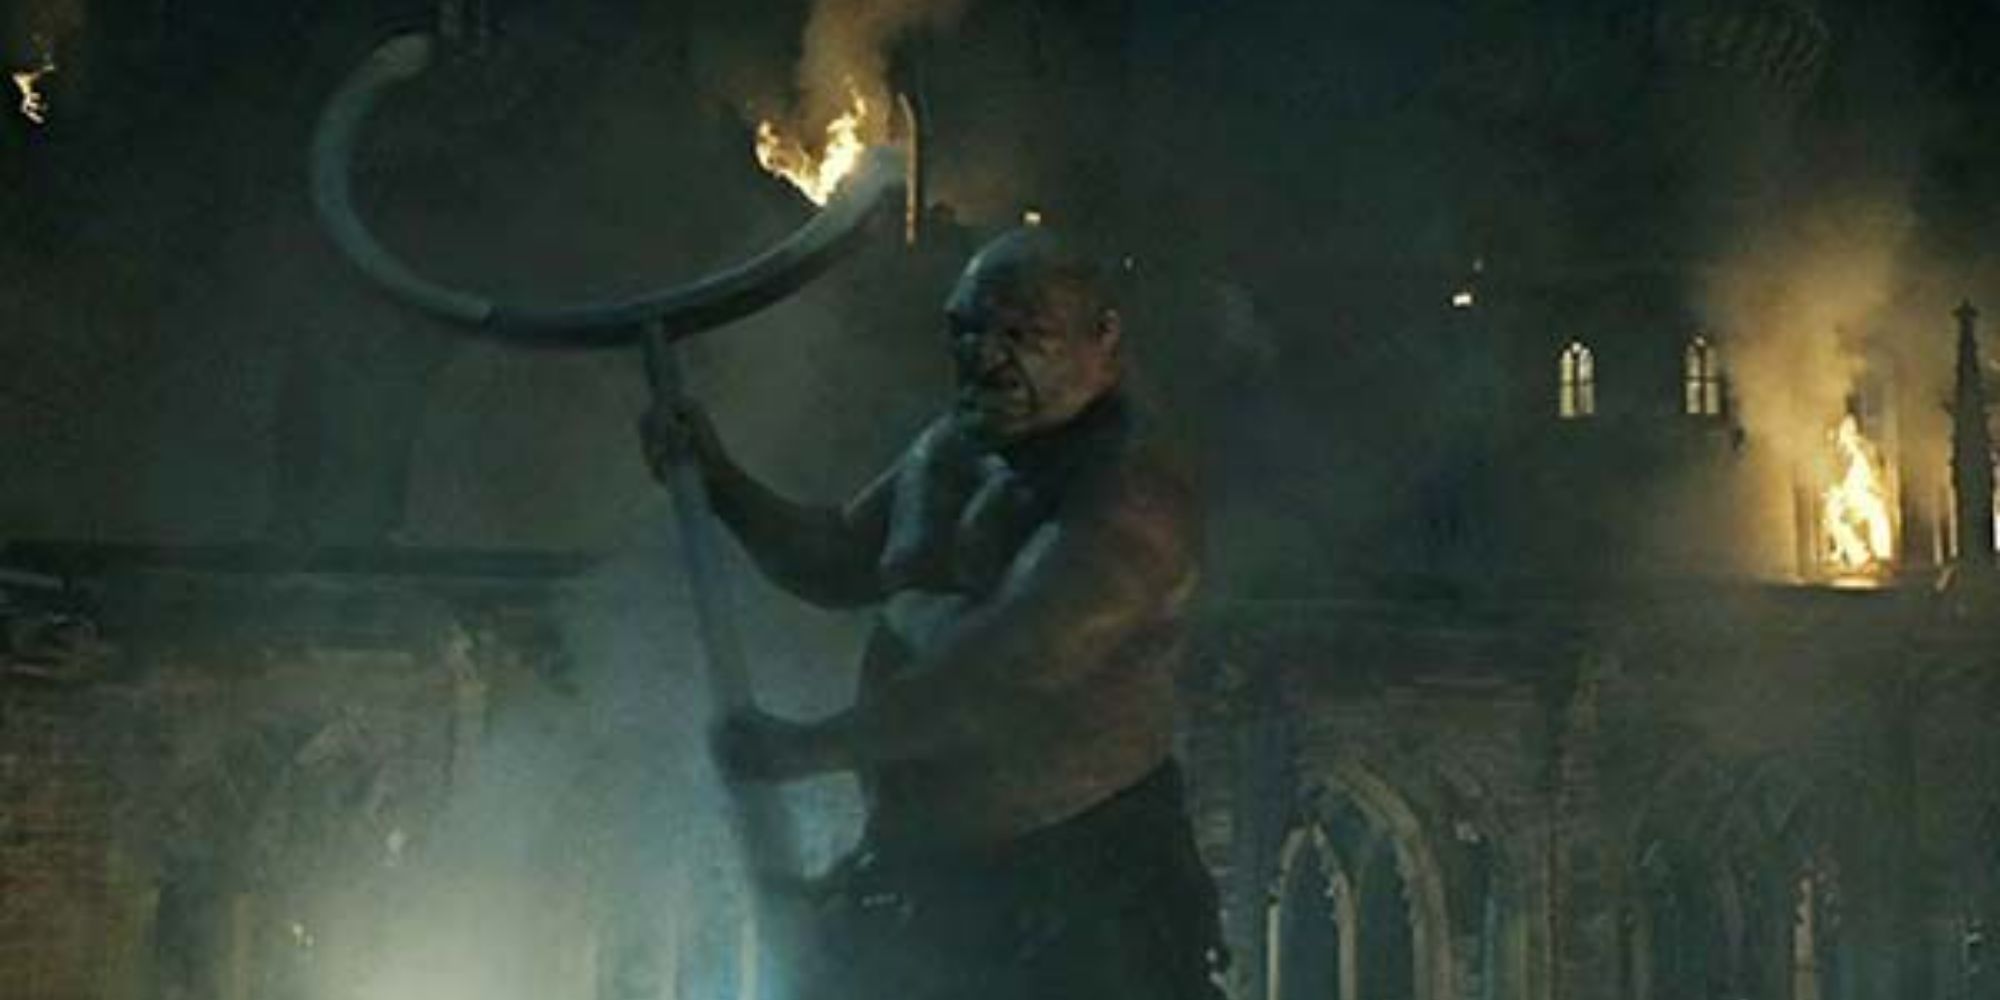 A giant lifting a weapon in the Battle of Hogwarts in Harry Potter